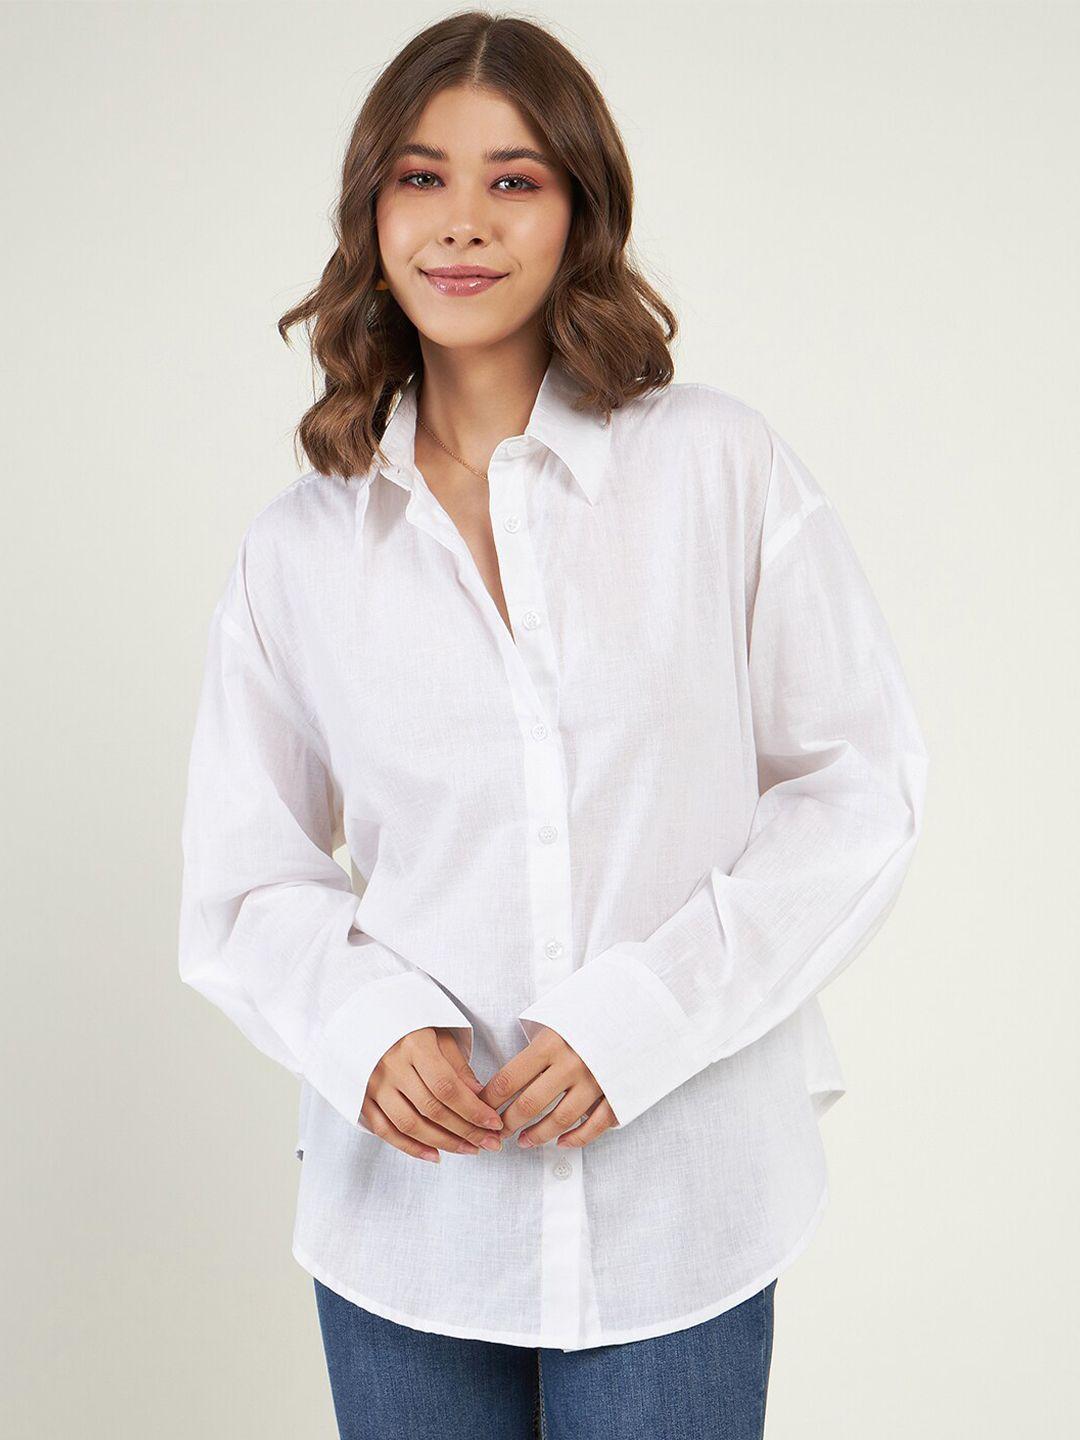 june & harry relaxed oversized spread collar long sleeve pure cotton causal shirt